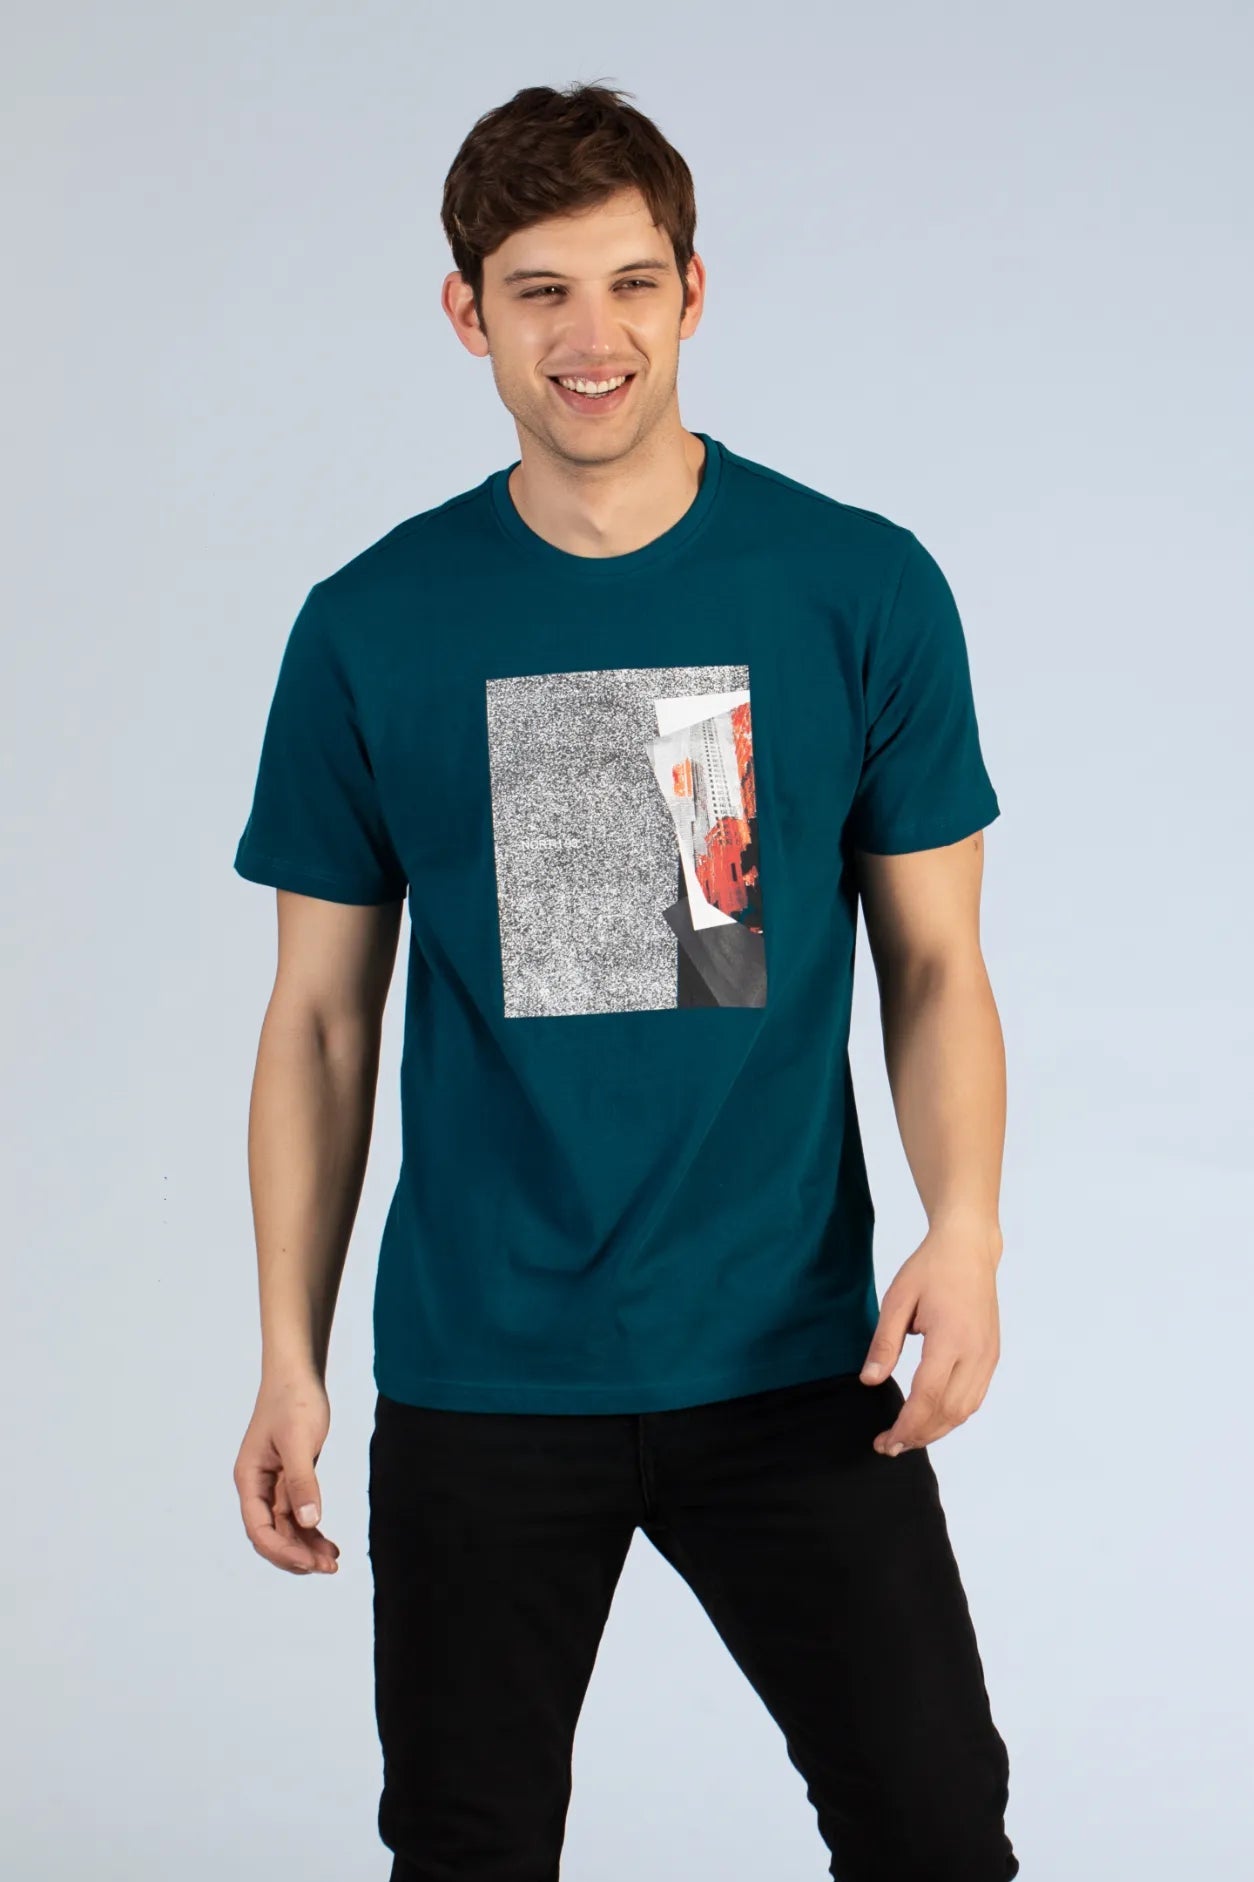 Buy Abstract Print Round Neck T-Shirt Online.